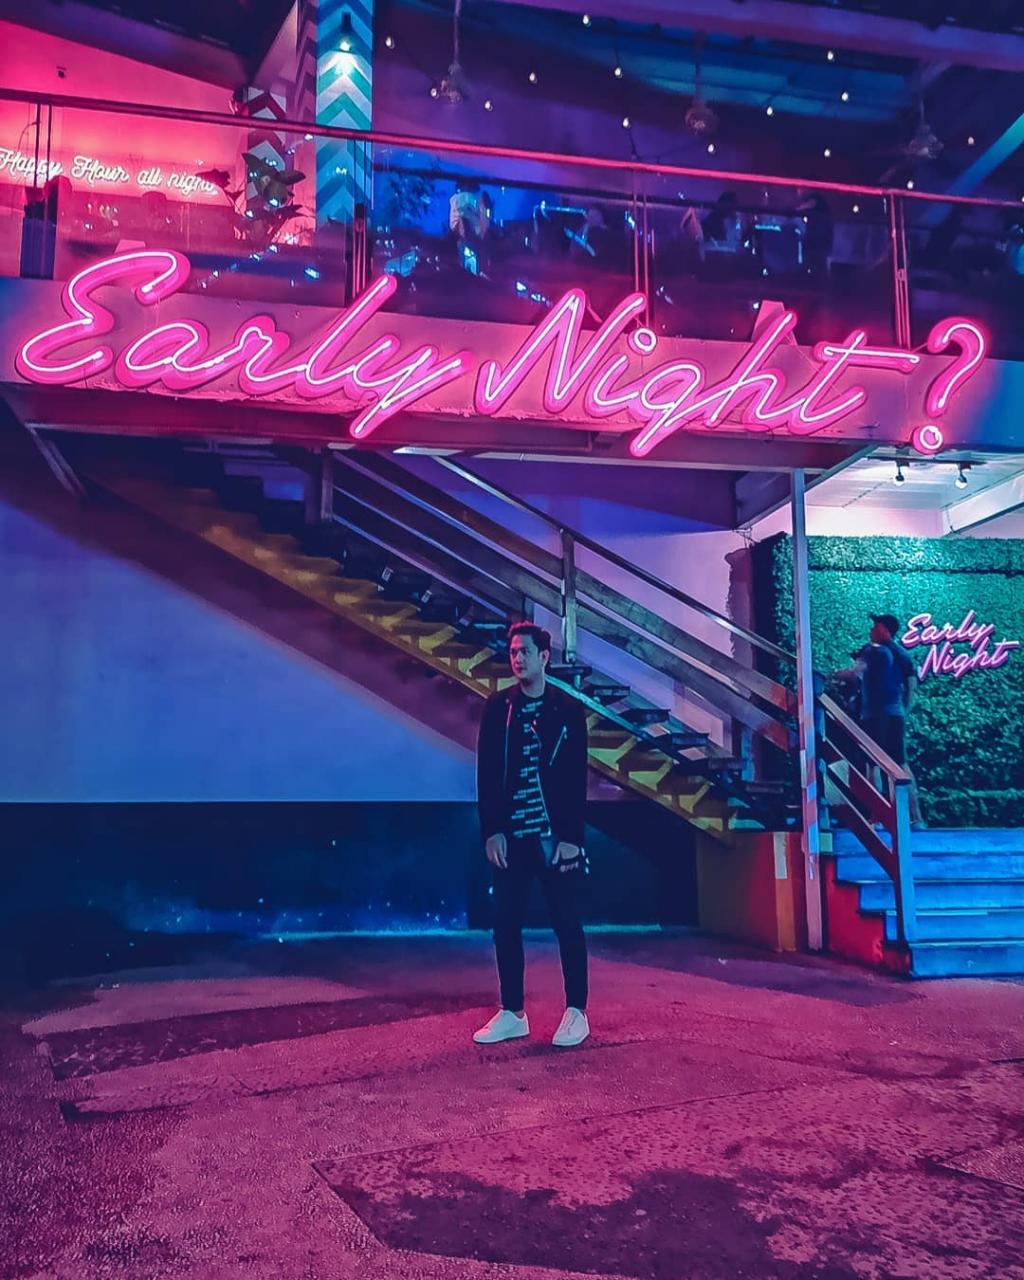 early night? neon lettering